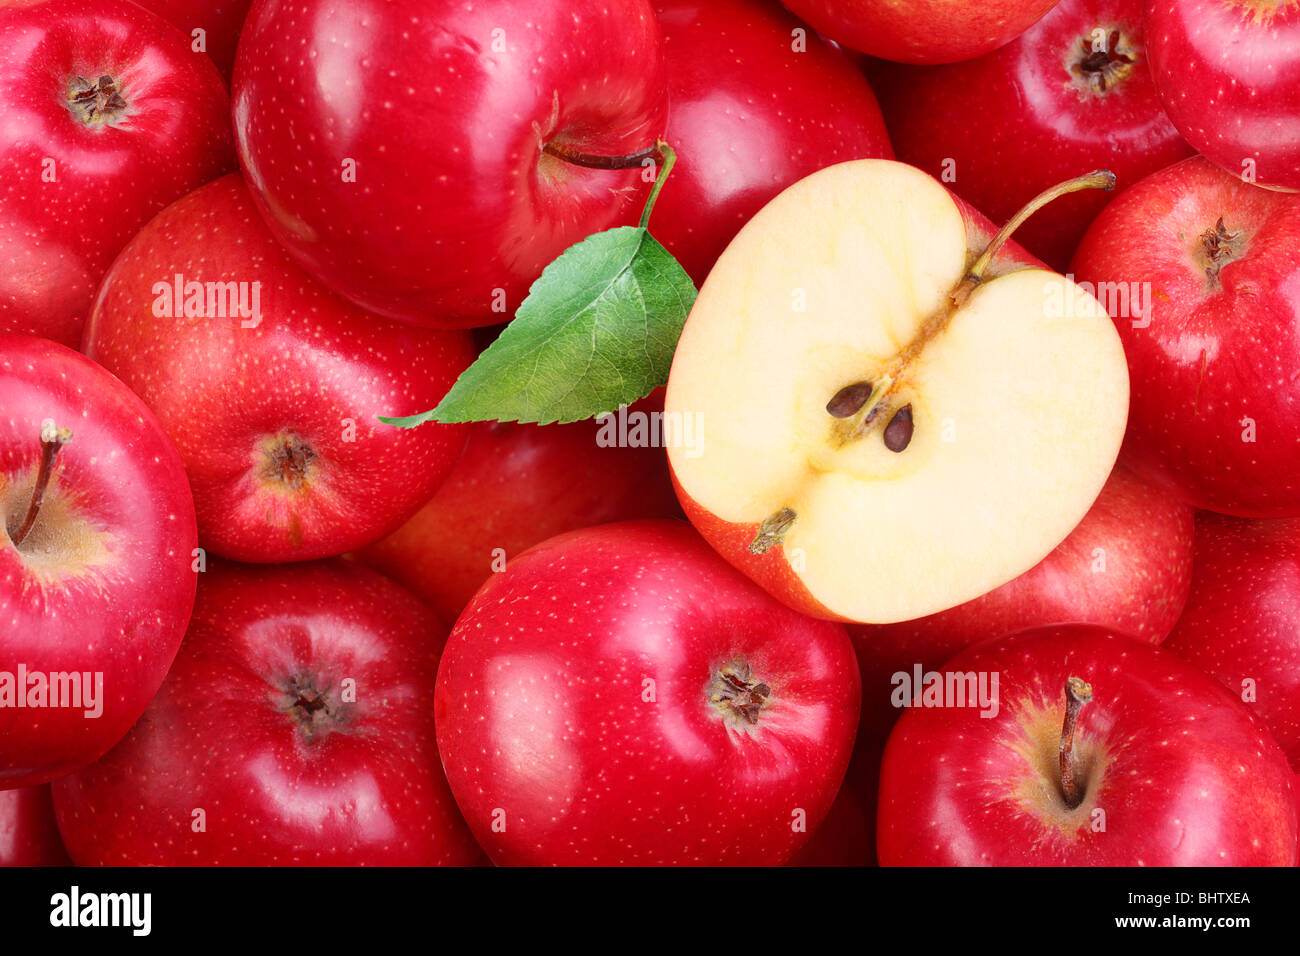 Red apples with leaf Stock Photo